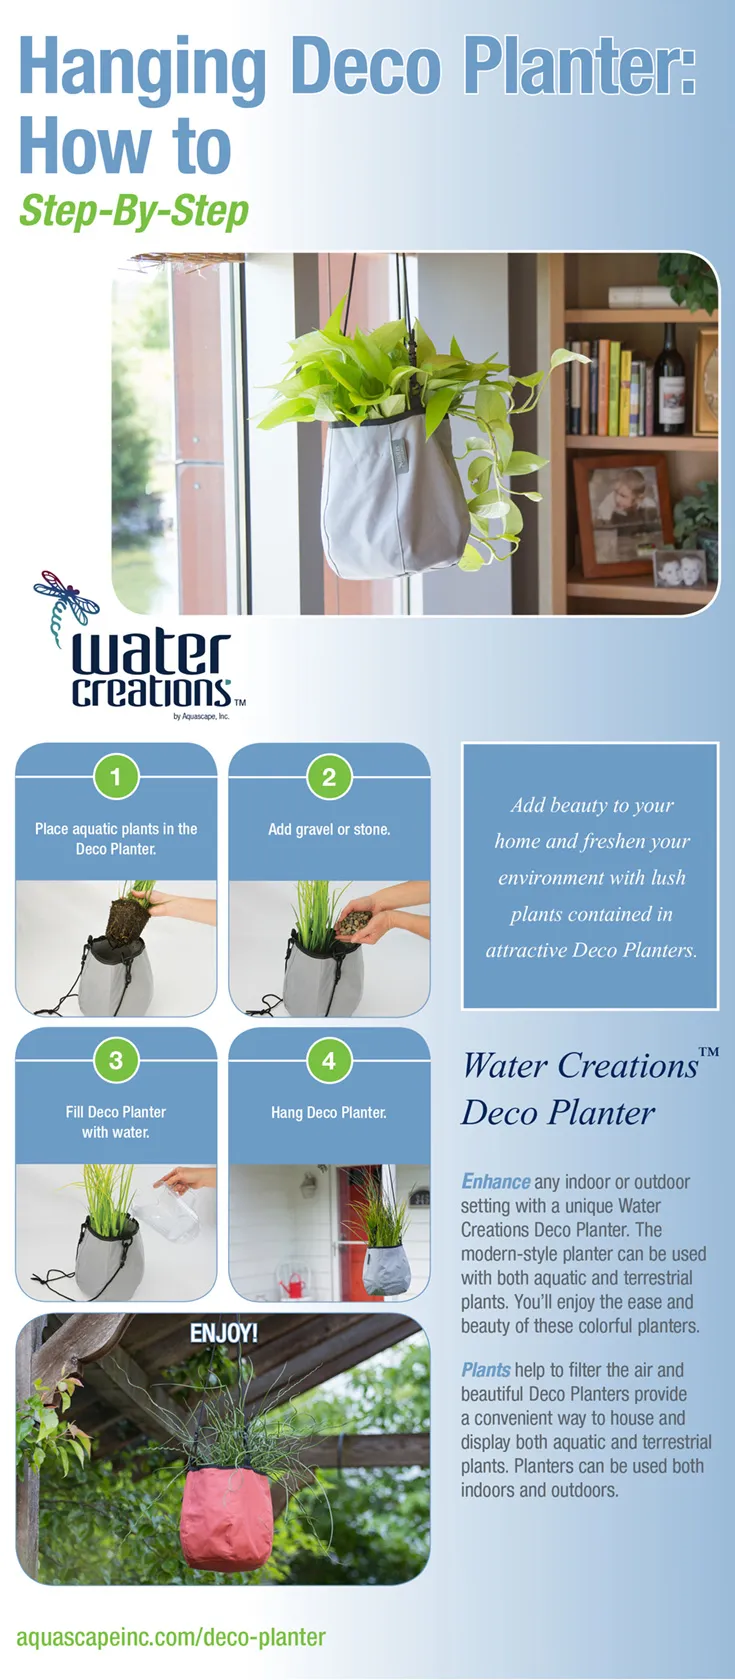 Water Creations Hanging Deco Planter INFOGRAPHIC